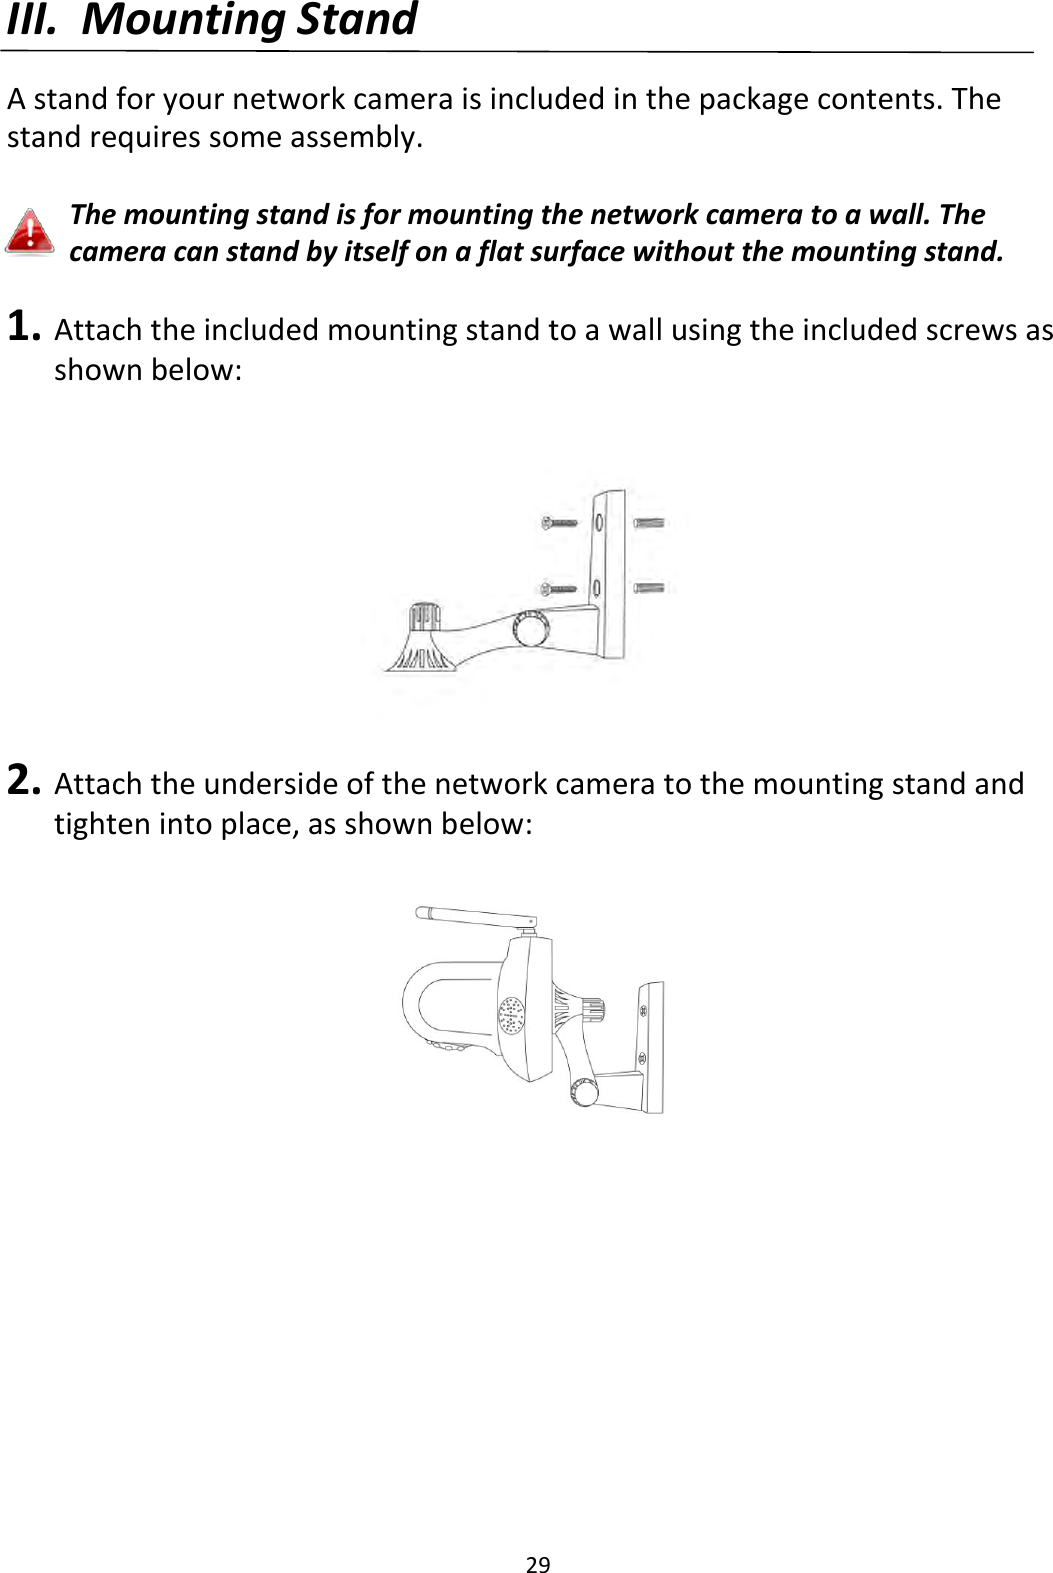 29  III. Mounting Stand  A stand for your network camera is included in the package contents. The stand requires some assembly.  The mounting stand is for mounting the network camera to a wall. The camera can stand by itself on a flat surface without the mounting stand.  1. Attach the included mounting stand to a wall using the included screws as shown below:  2. Attach the underside of the network camera to the mounting stand and tighten into place, as shown below:    